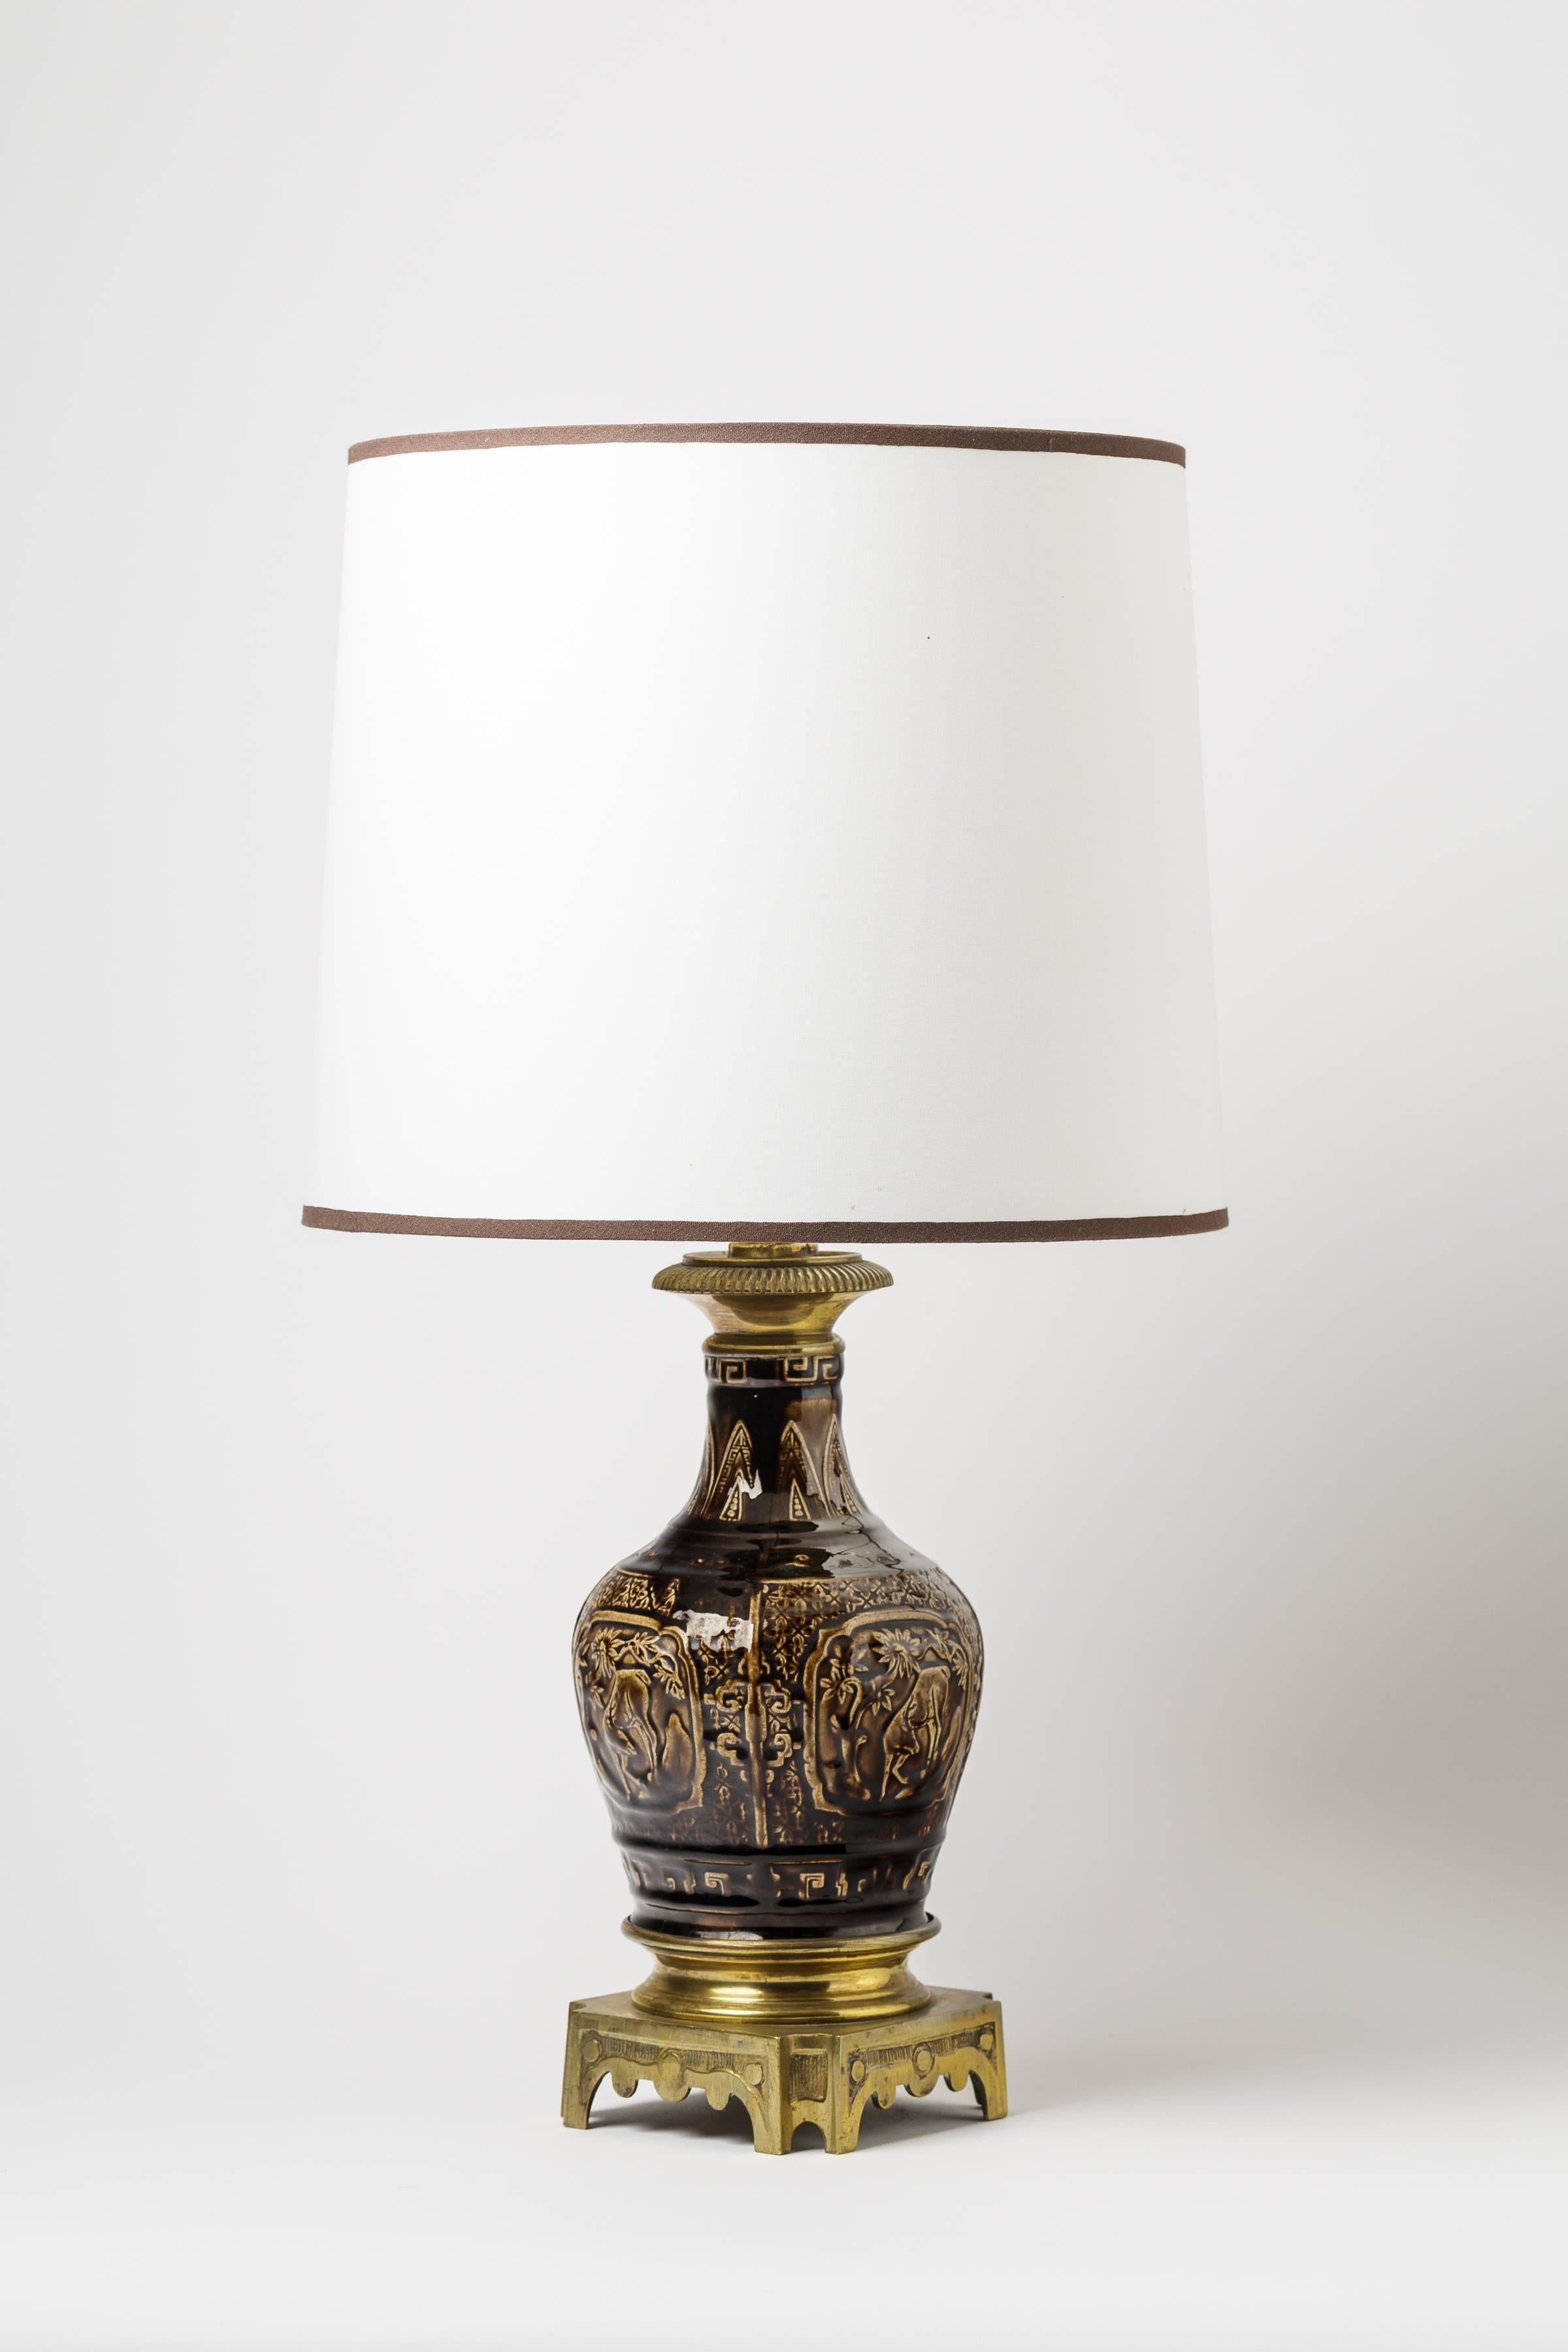 Extraordinary table lamp by Theodore Deck.

Porcelain with signature T and mark.

Sold with the lampshade and electrical system.

Perfect original conditions.